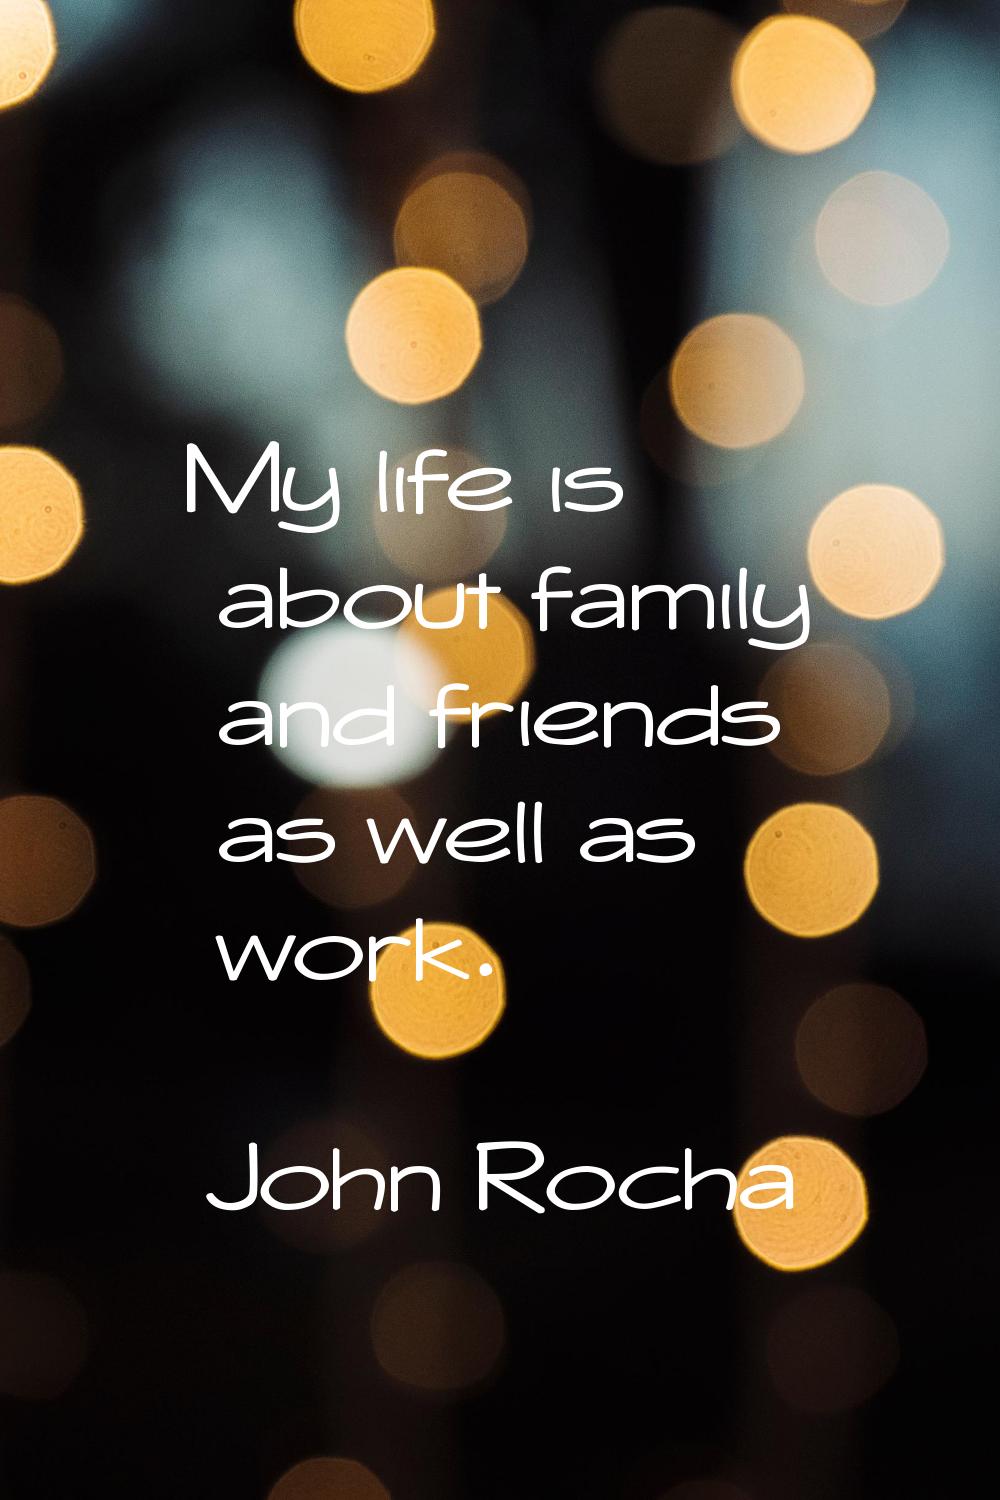 My life is about family and friends as well as work.